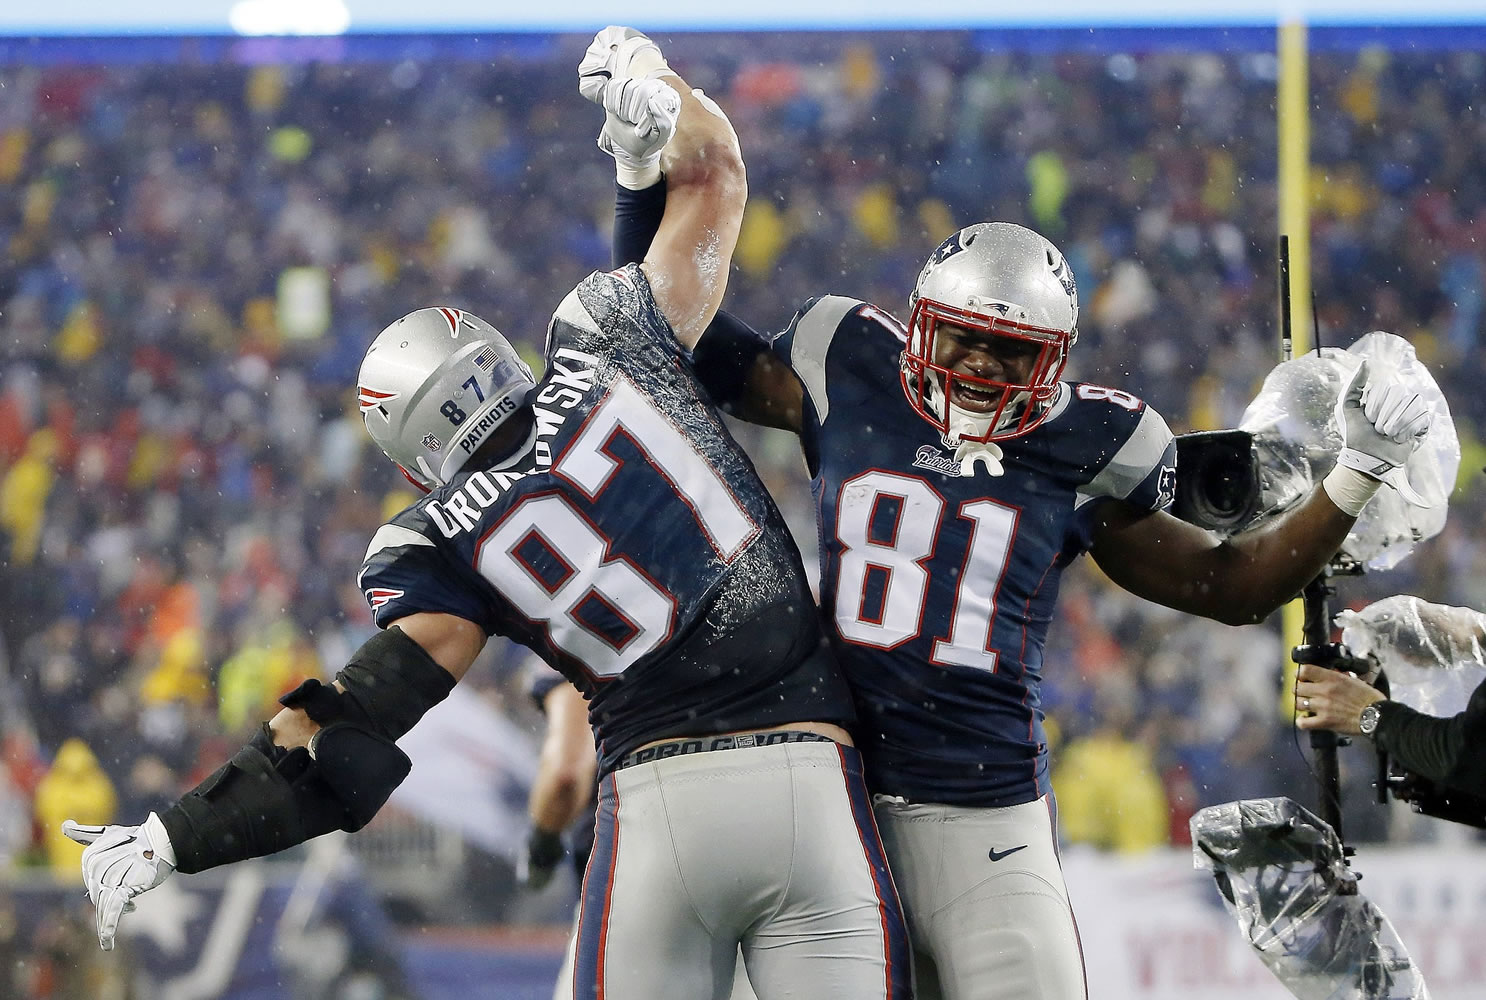 New England Patriots tight end Rob Gronkowski (87) celebrates with teammate Timothy Wright after his 5-yard touchdown catch during the second half of the AFC Championship game against the Indianapolis Colts on Sunday, Jan. 18, 2015, in Foxborough, Mass.